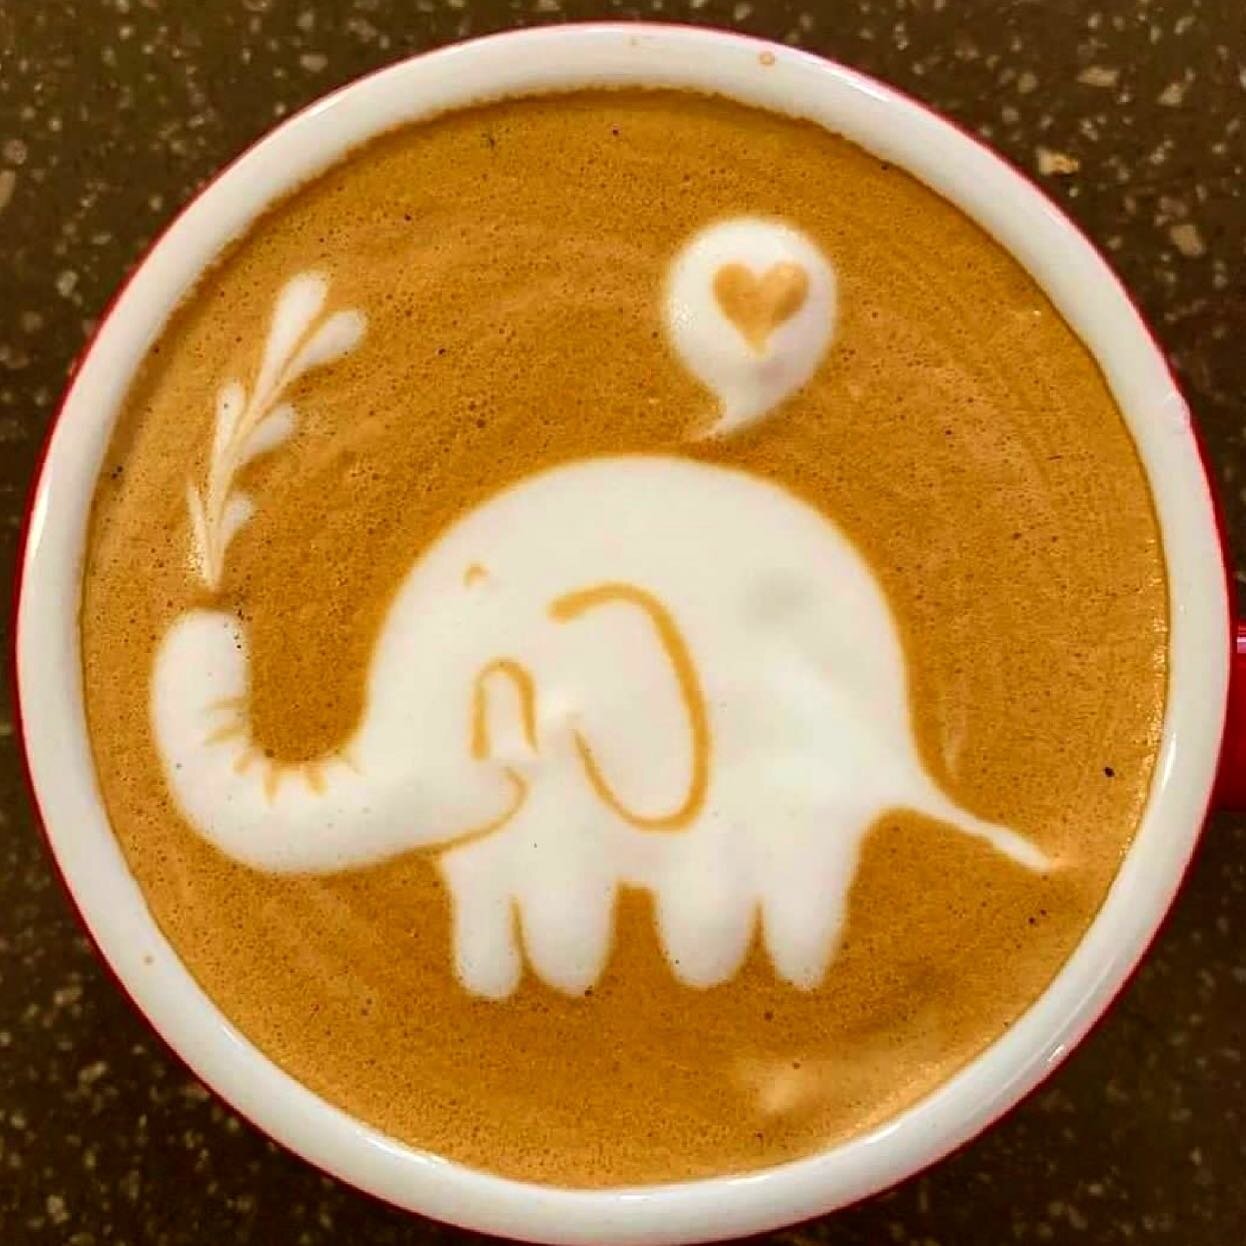 Send us a picture of your favorite latte art and we will share it on our story! Who doesn&rsquo;t love latte art!!
📸:@woodentamper

#coffeetillchampagne #unapologeticallyblack #blackwomen #blacklivesmatter #sayhername #illdrinktothat #allthethings #